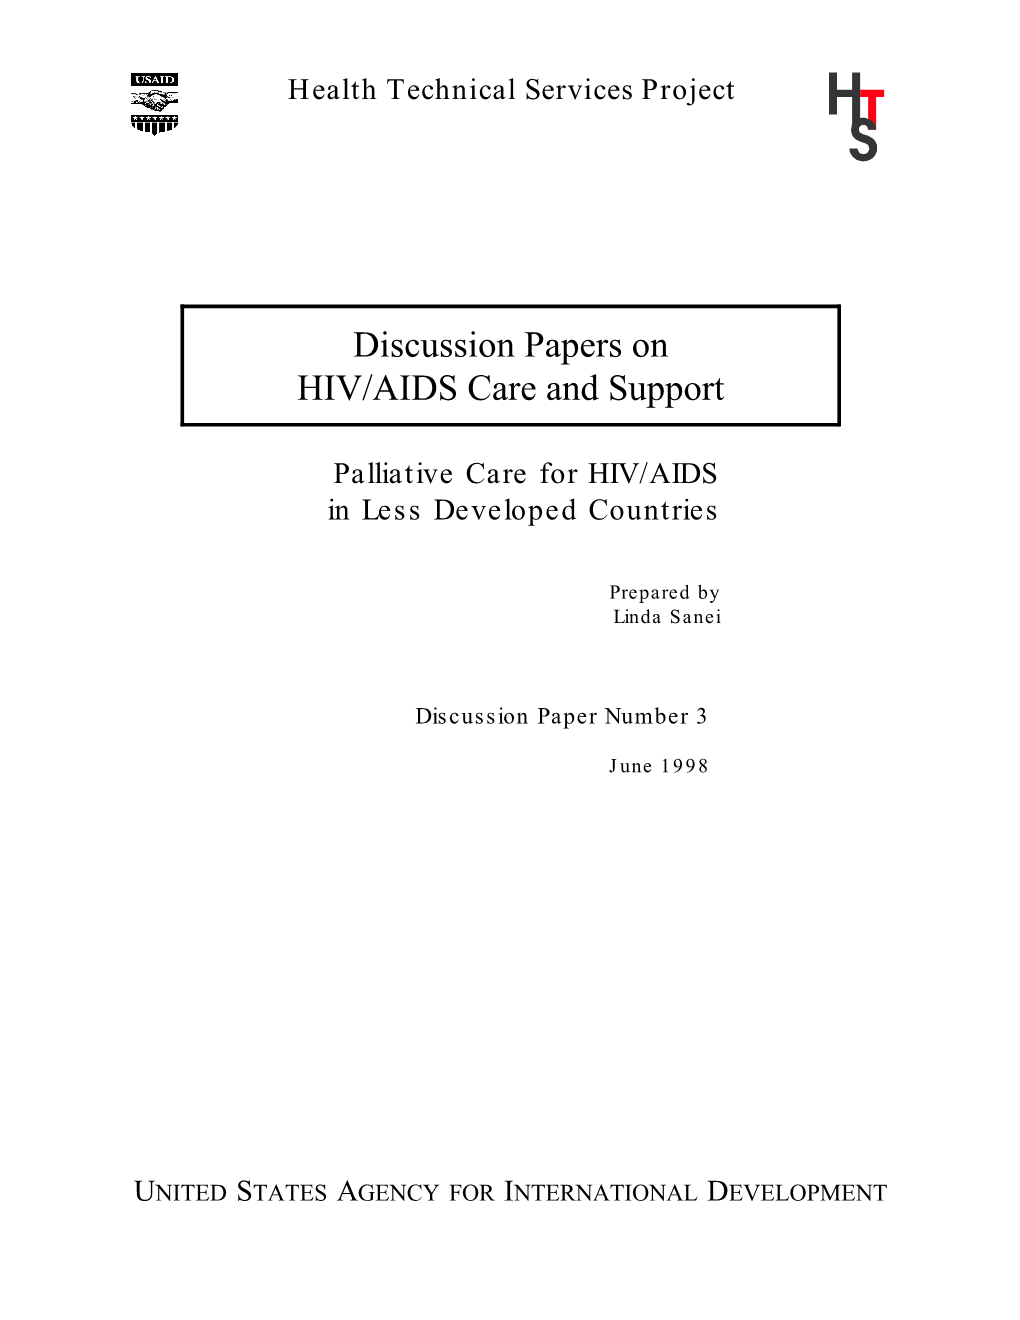 Discussion Papers on HIV/AIDS Care and Support